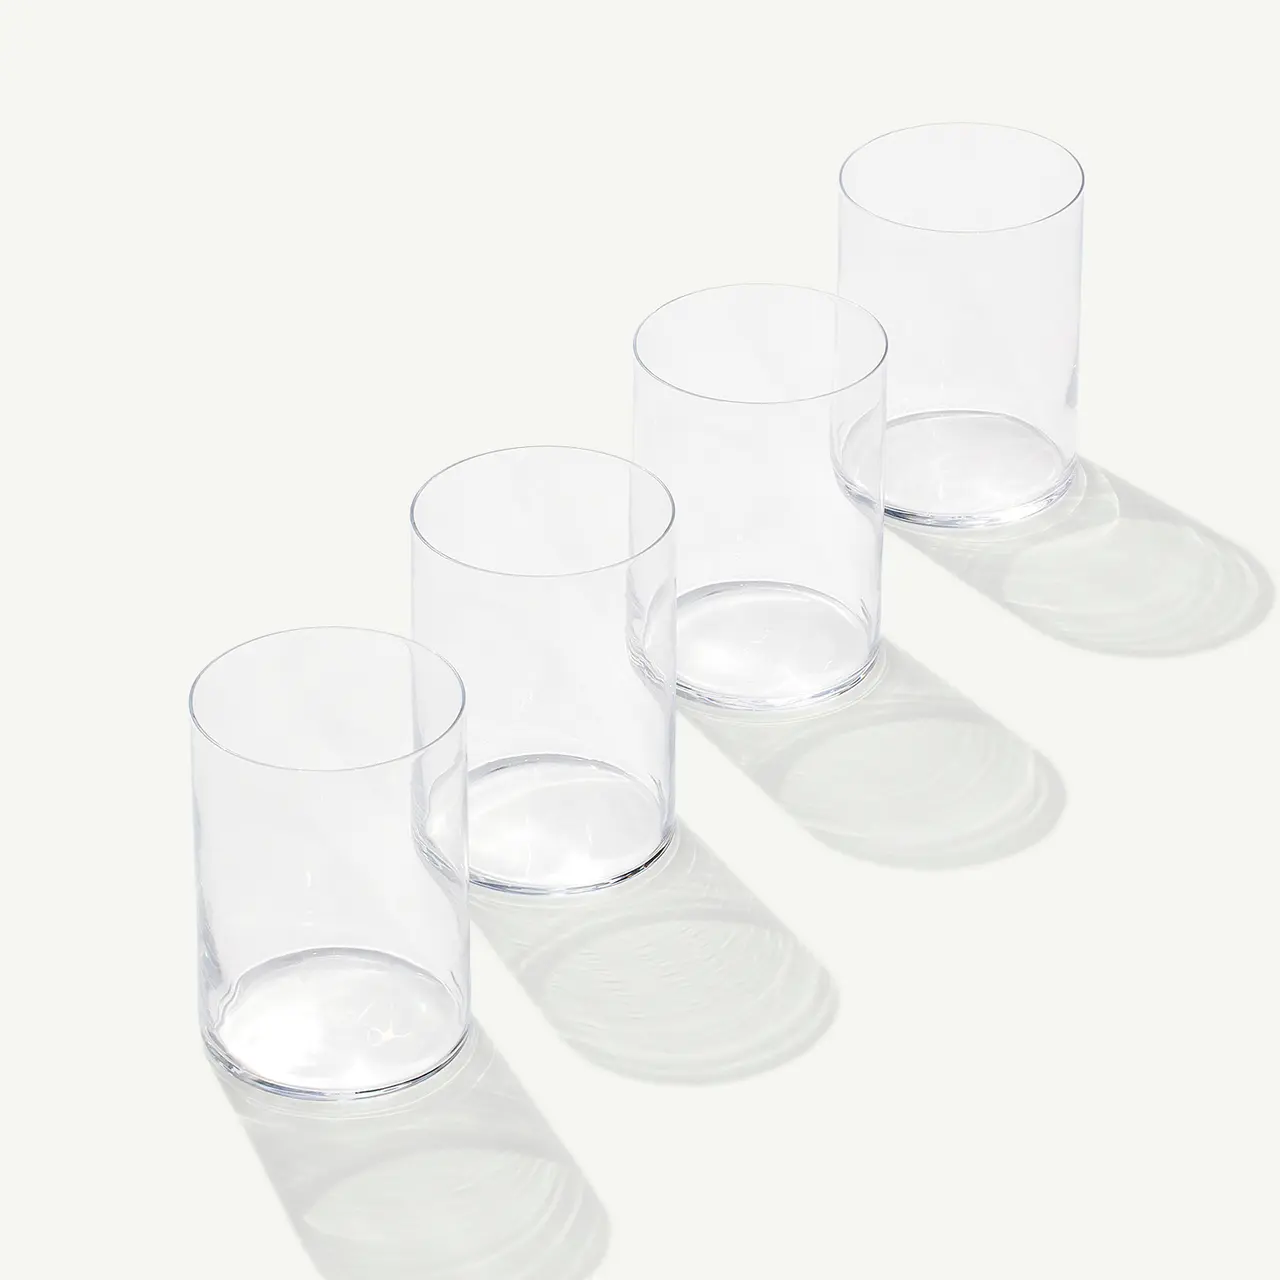 Four empty clear glasses are arranged diagonally casting soft shadows on a light surface.